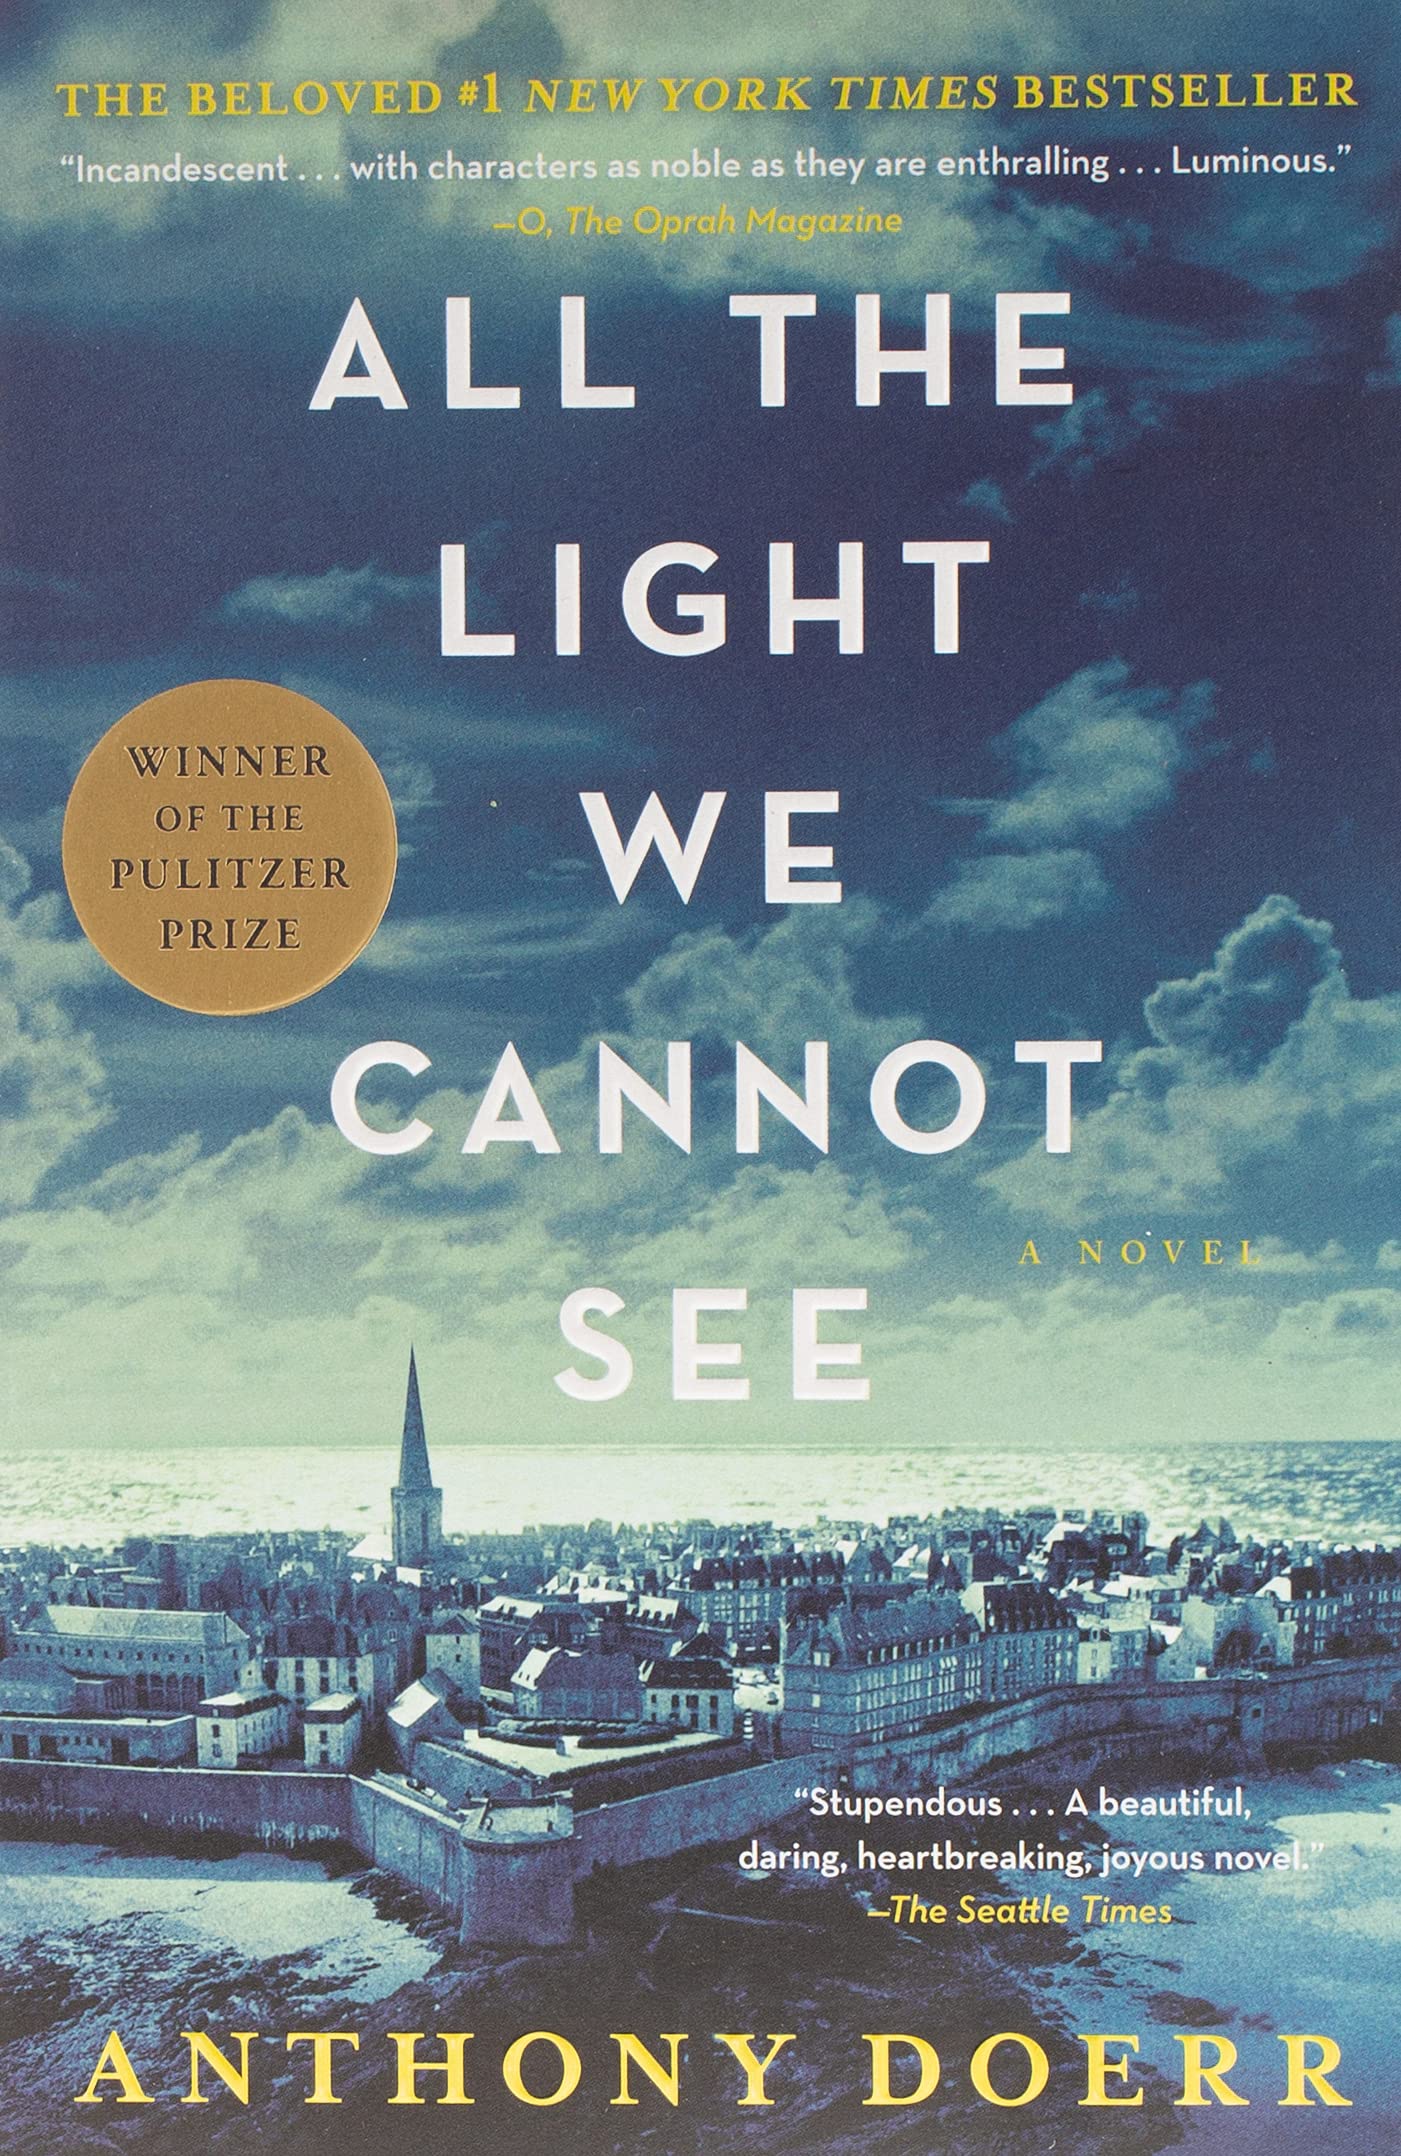 All the light we cannot see  : a novel / by Anthony Doerr.